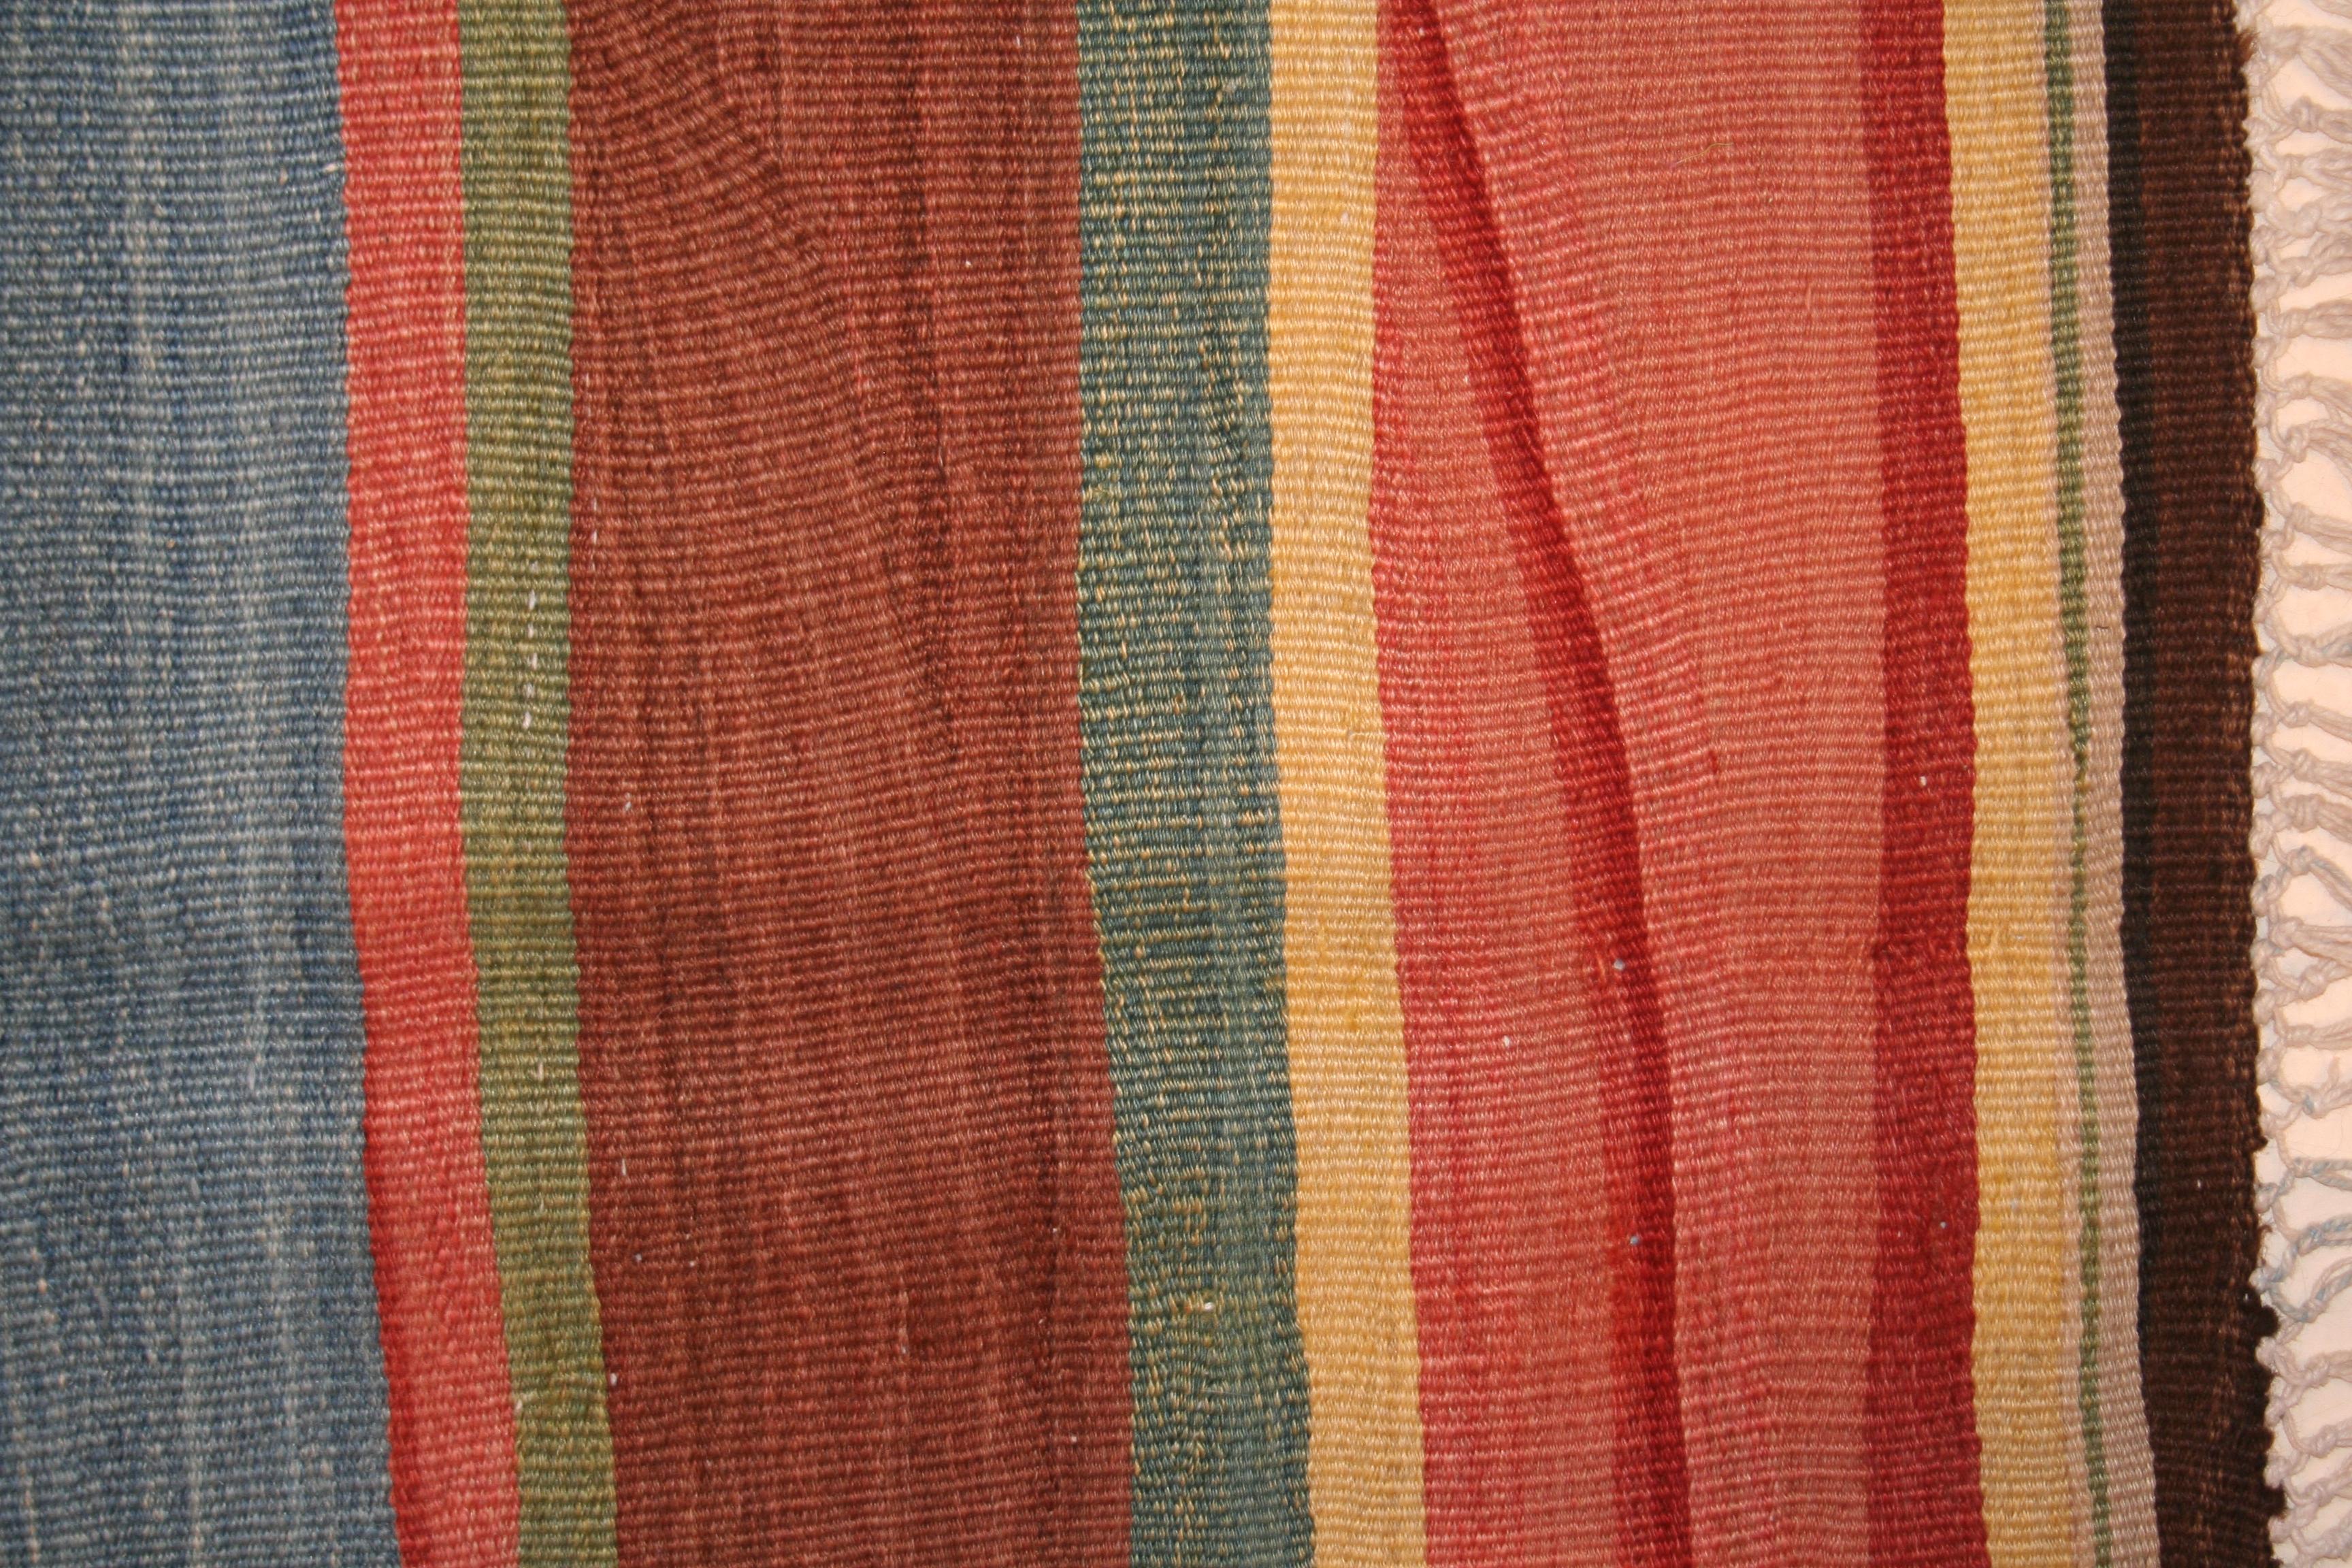 A stunning south Caucasian kilim distinguished by an horizontal arrangement of polychrome stripes of varying widths. The rich palette consists of vegetable dyes, making the wool glisten in shades that mimic nature. The sturdy texture of this